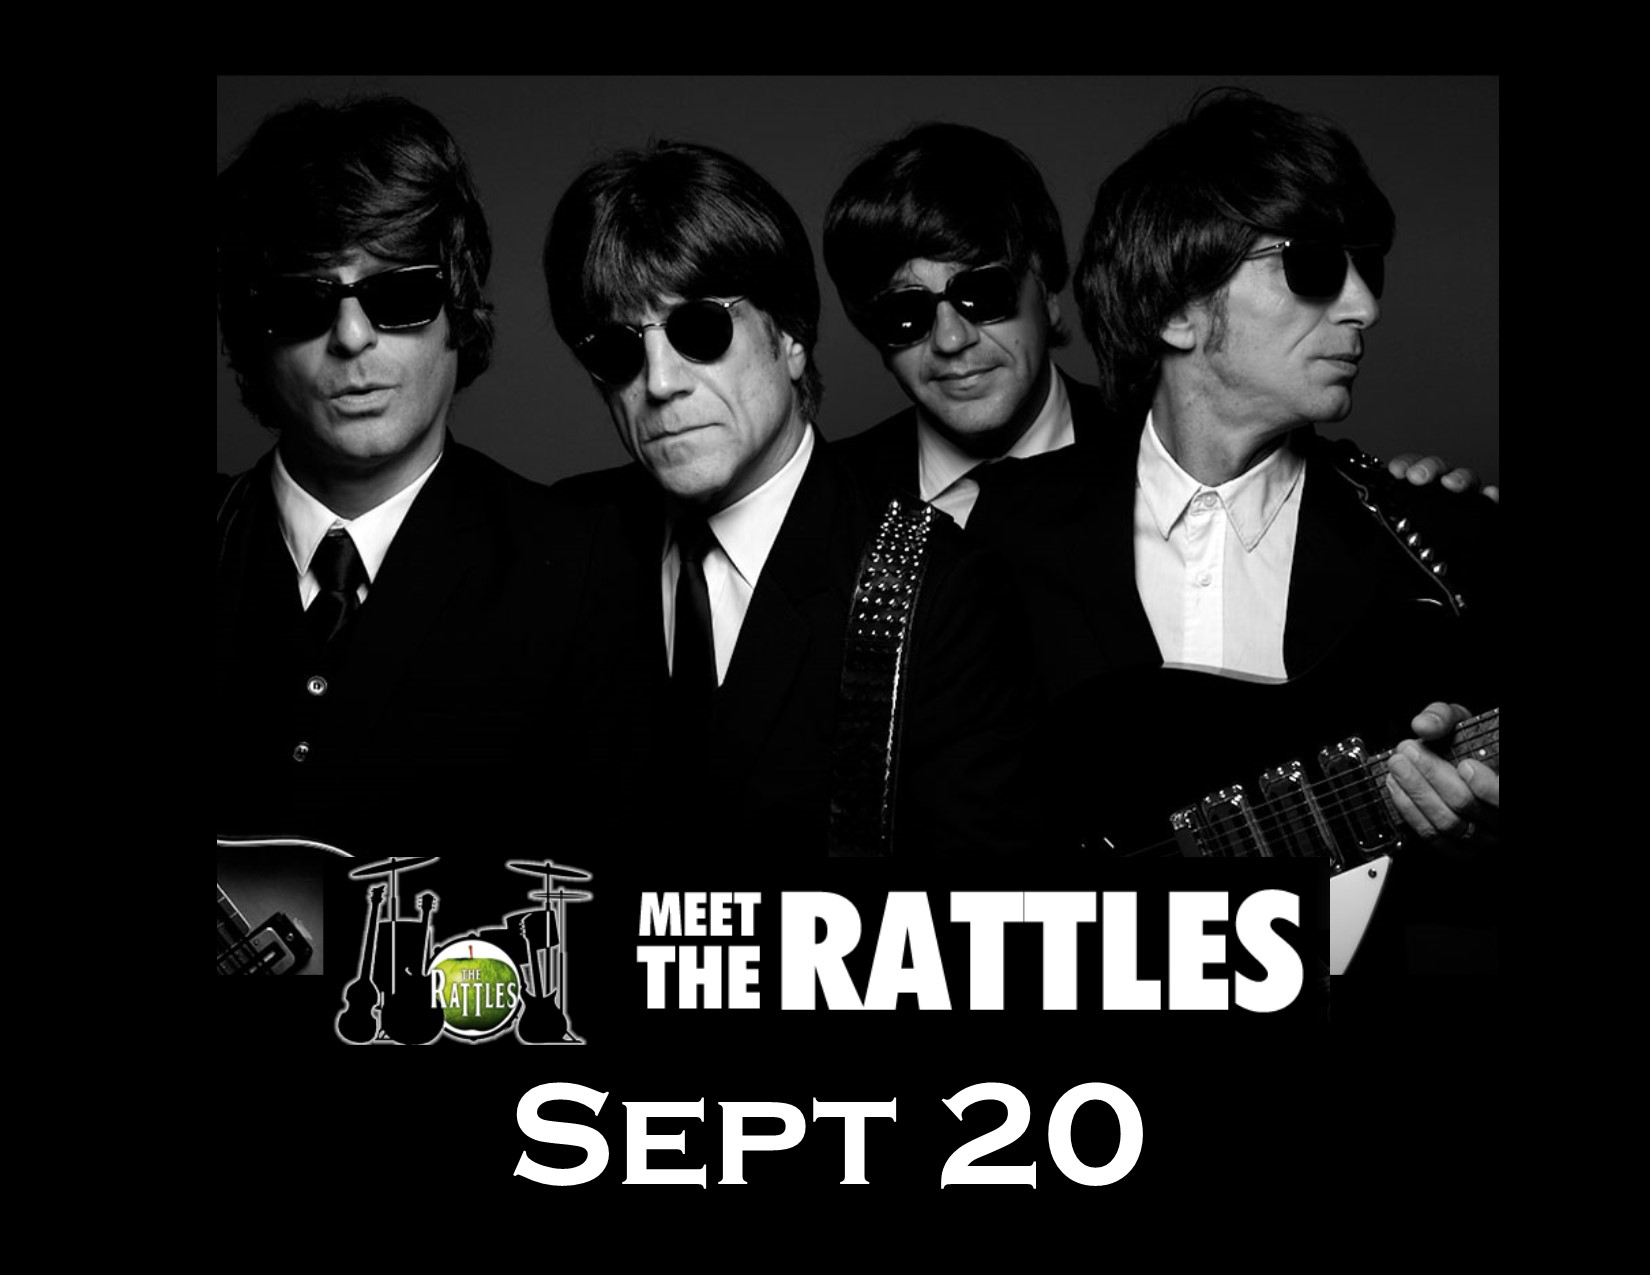 THE RATTLES - Canada's Most Authentic Tribute to THE BEATLES